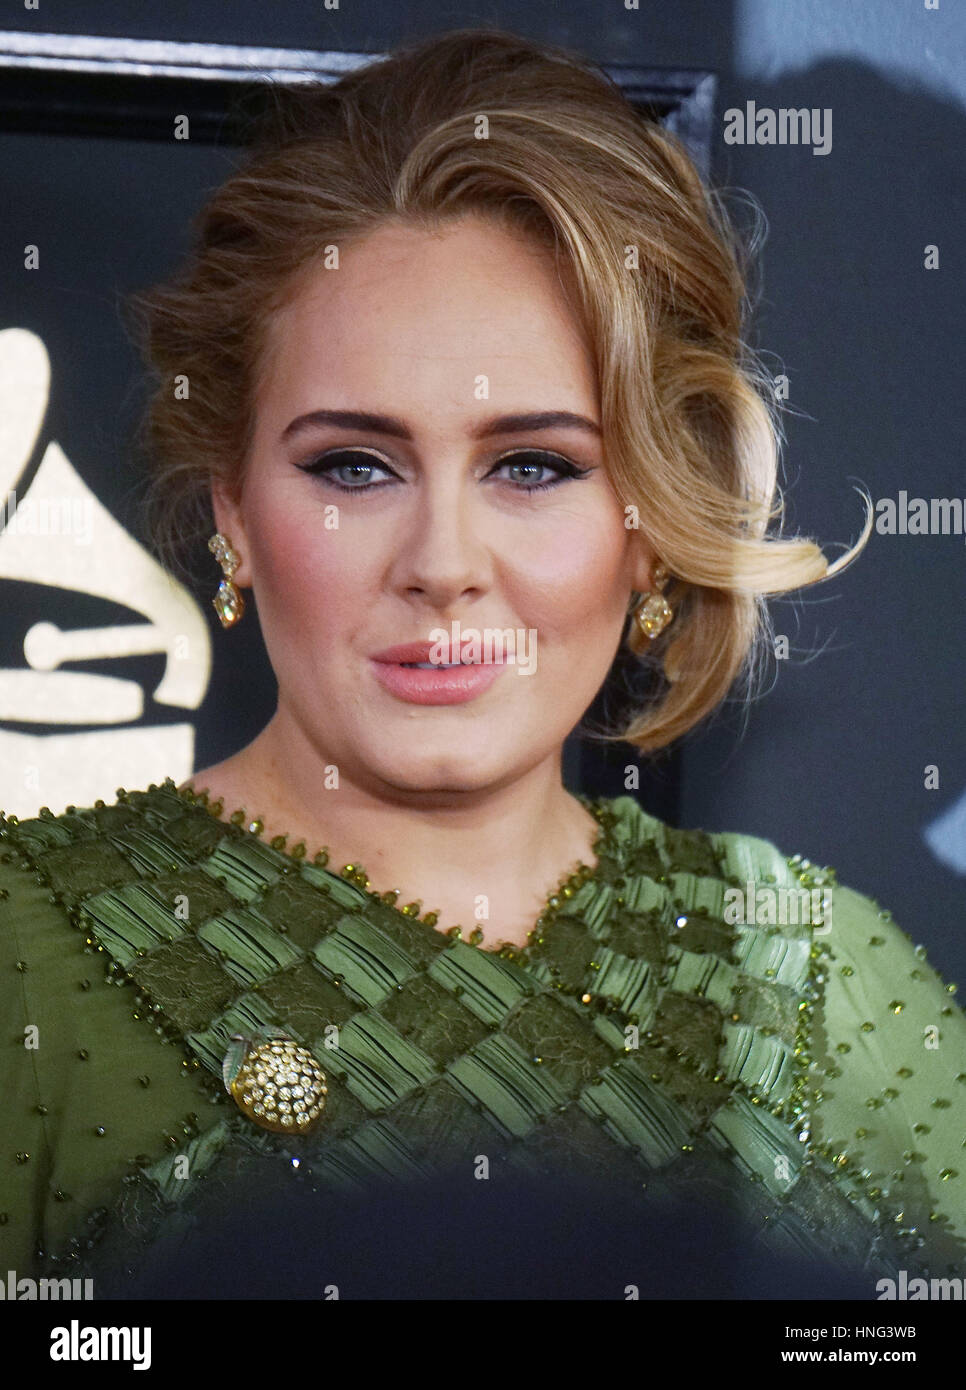 Adele 077 arriving at the 59th Annual Grammy Awards 2017  at Staples Center in Los Angeles. February 12, 2017. Stock Photo